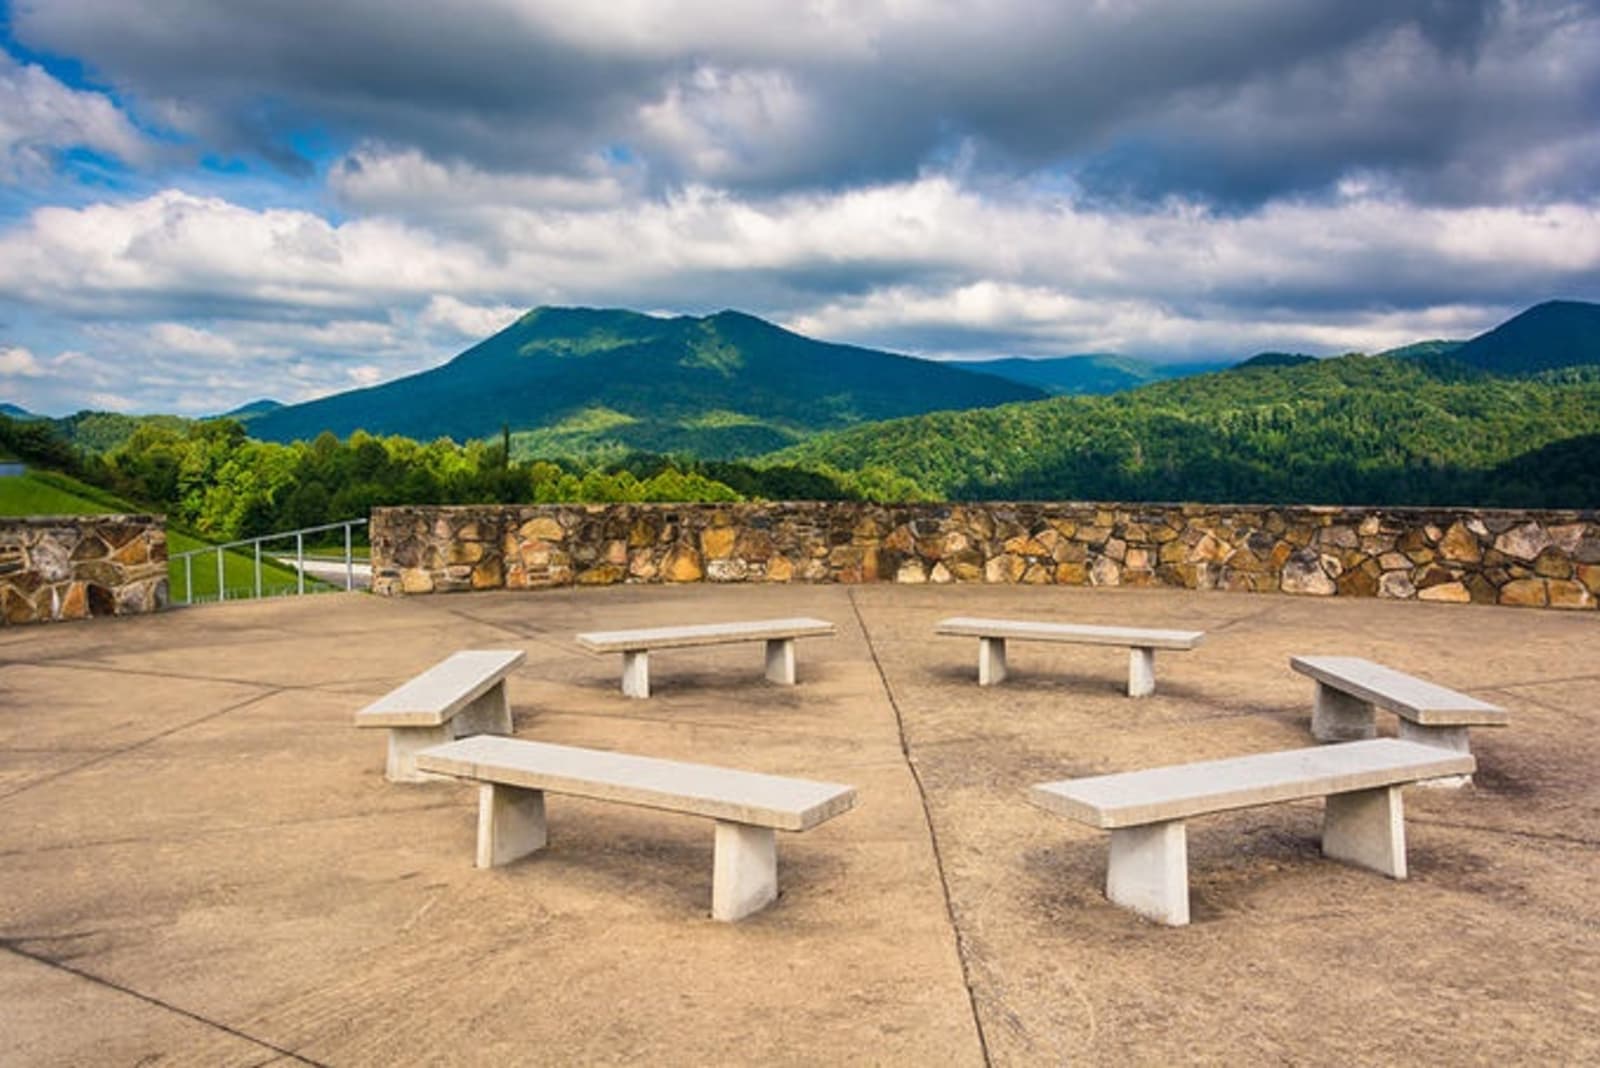 Benches-and-views-of-the-Appalachian-Mountains-from-Bald-Mountain-Ridge-scenic-overlook-along-I-26-in-Tennessee.-RS.jpg